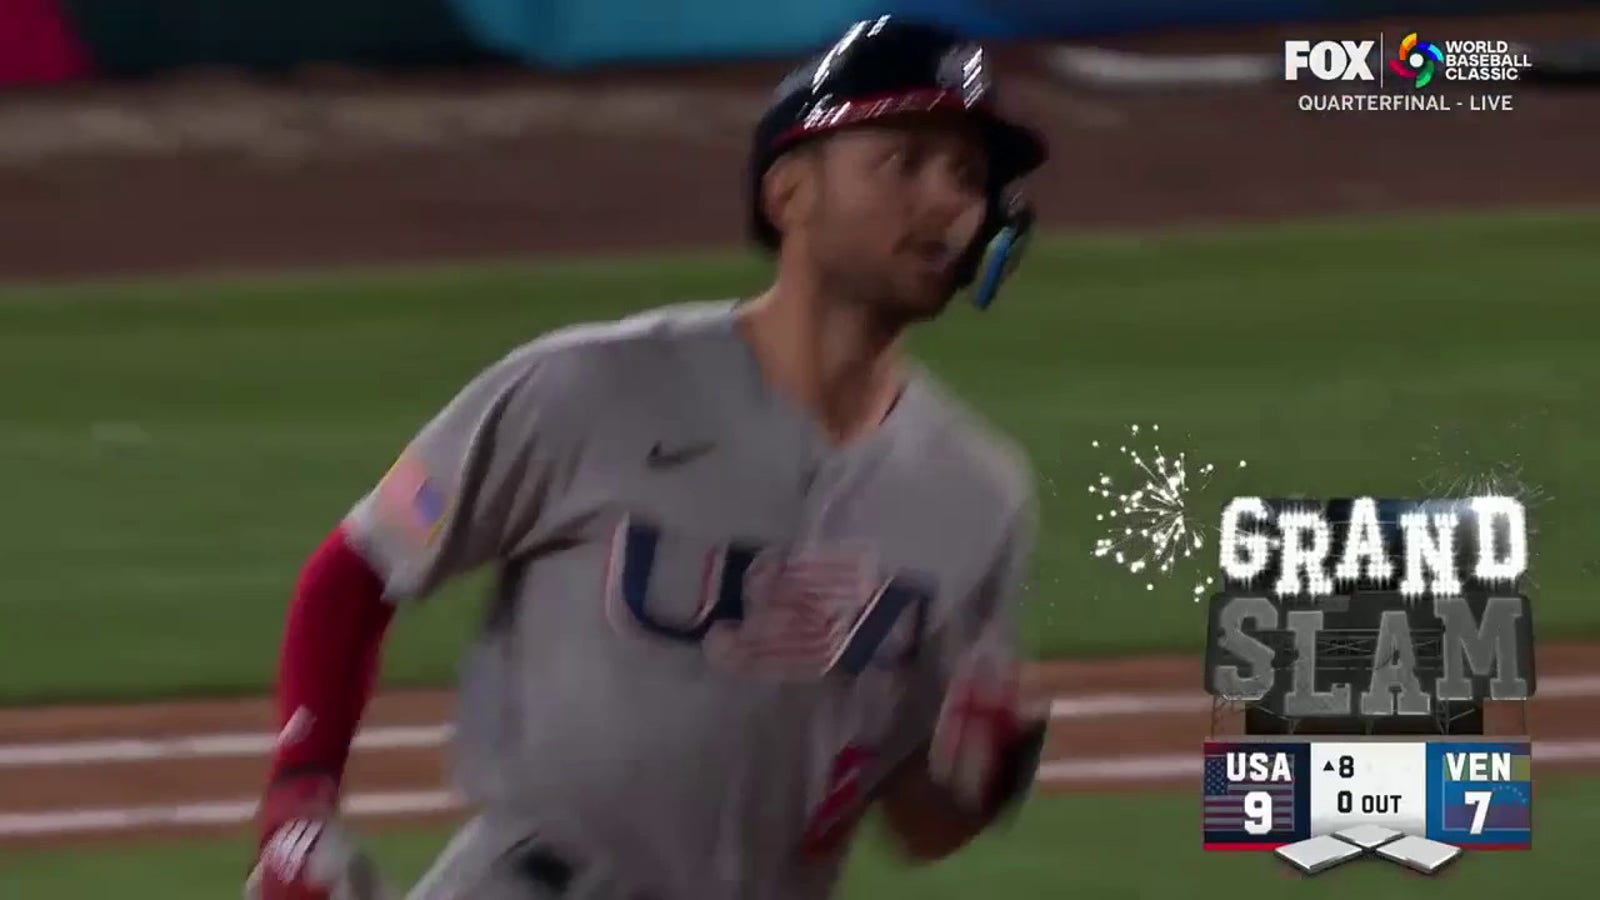 Trea Turner crushes a go-ahead grand slam that gives the USA a 9-7 lead in the eighth inning